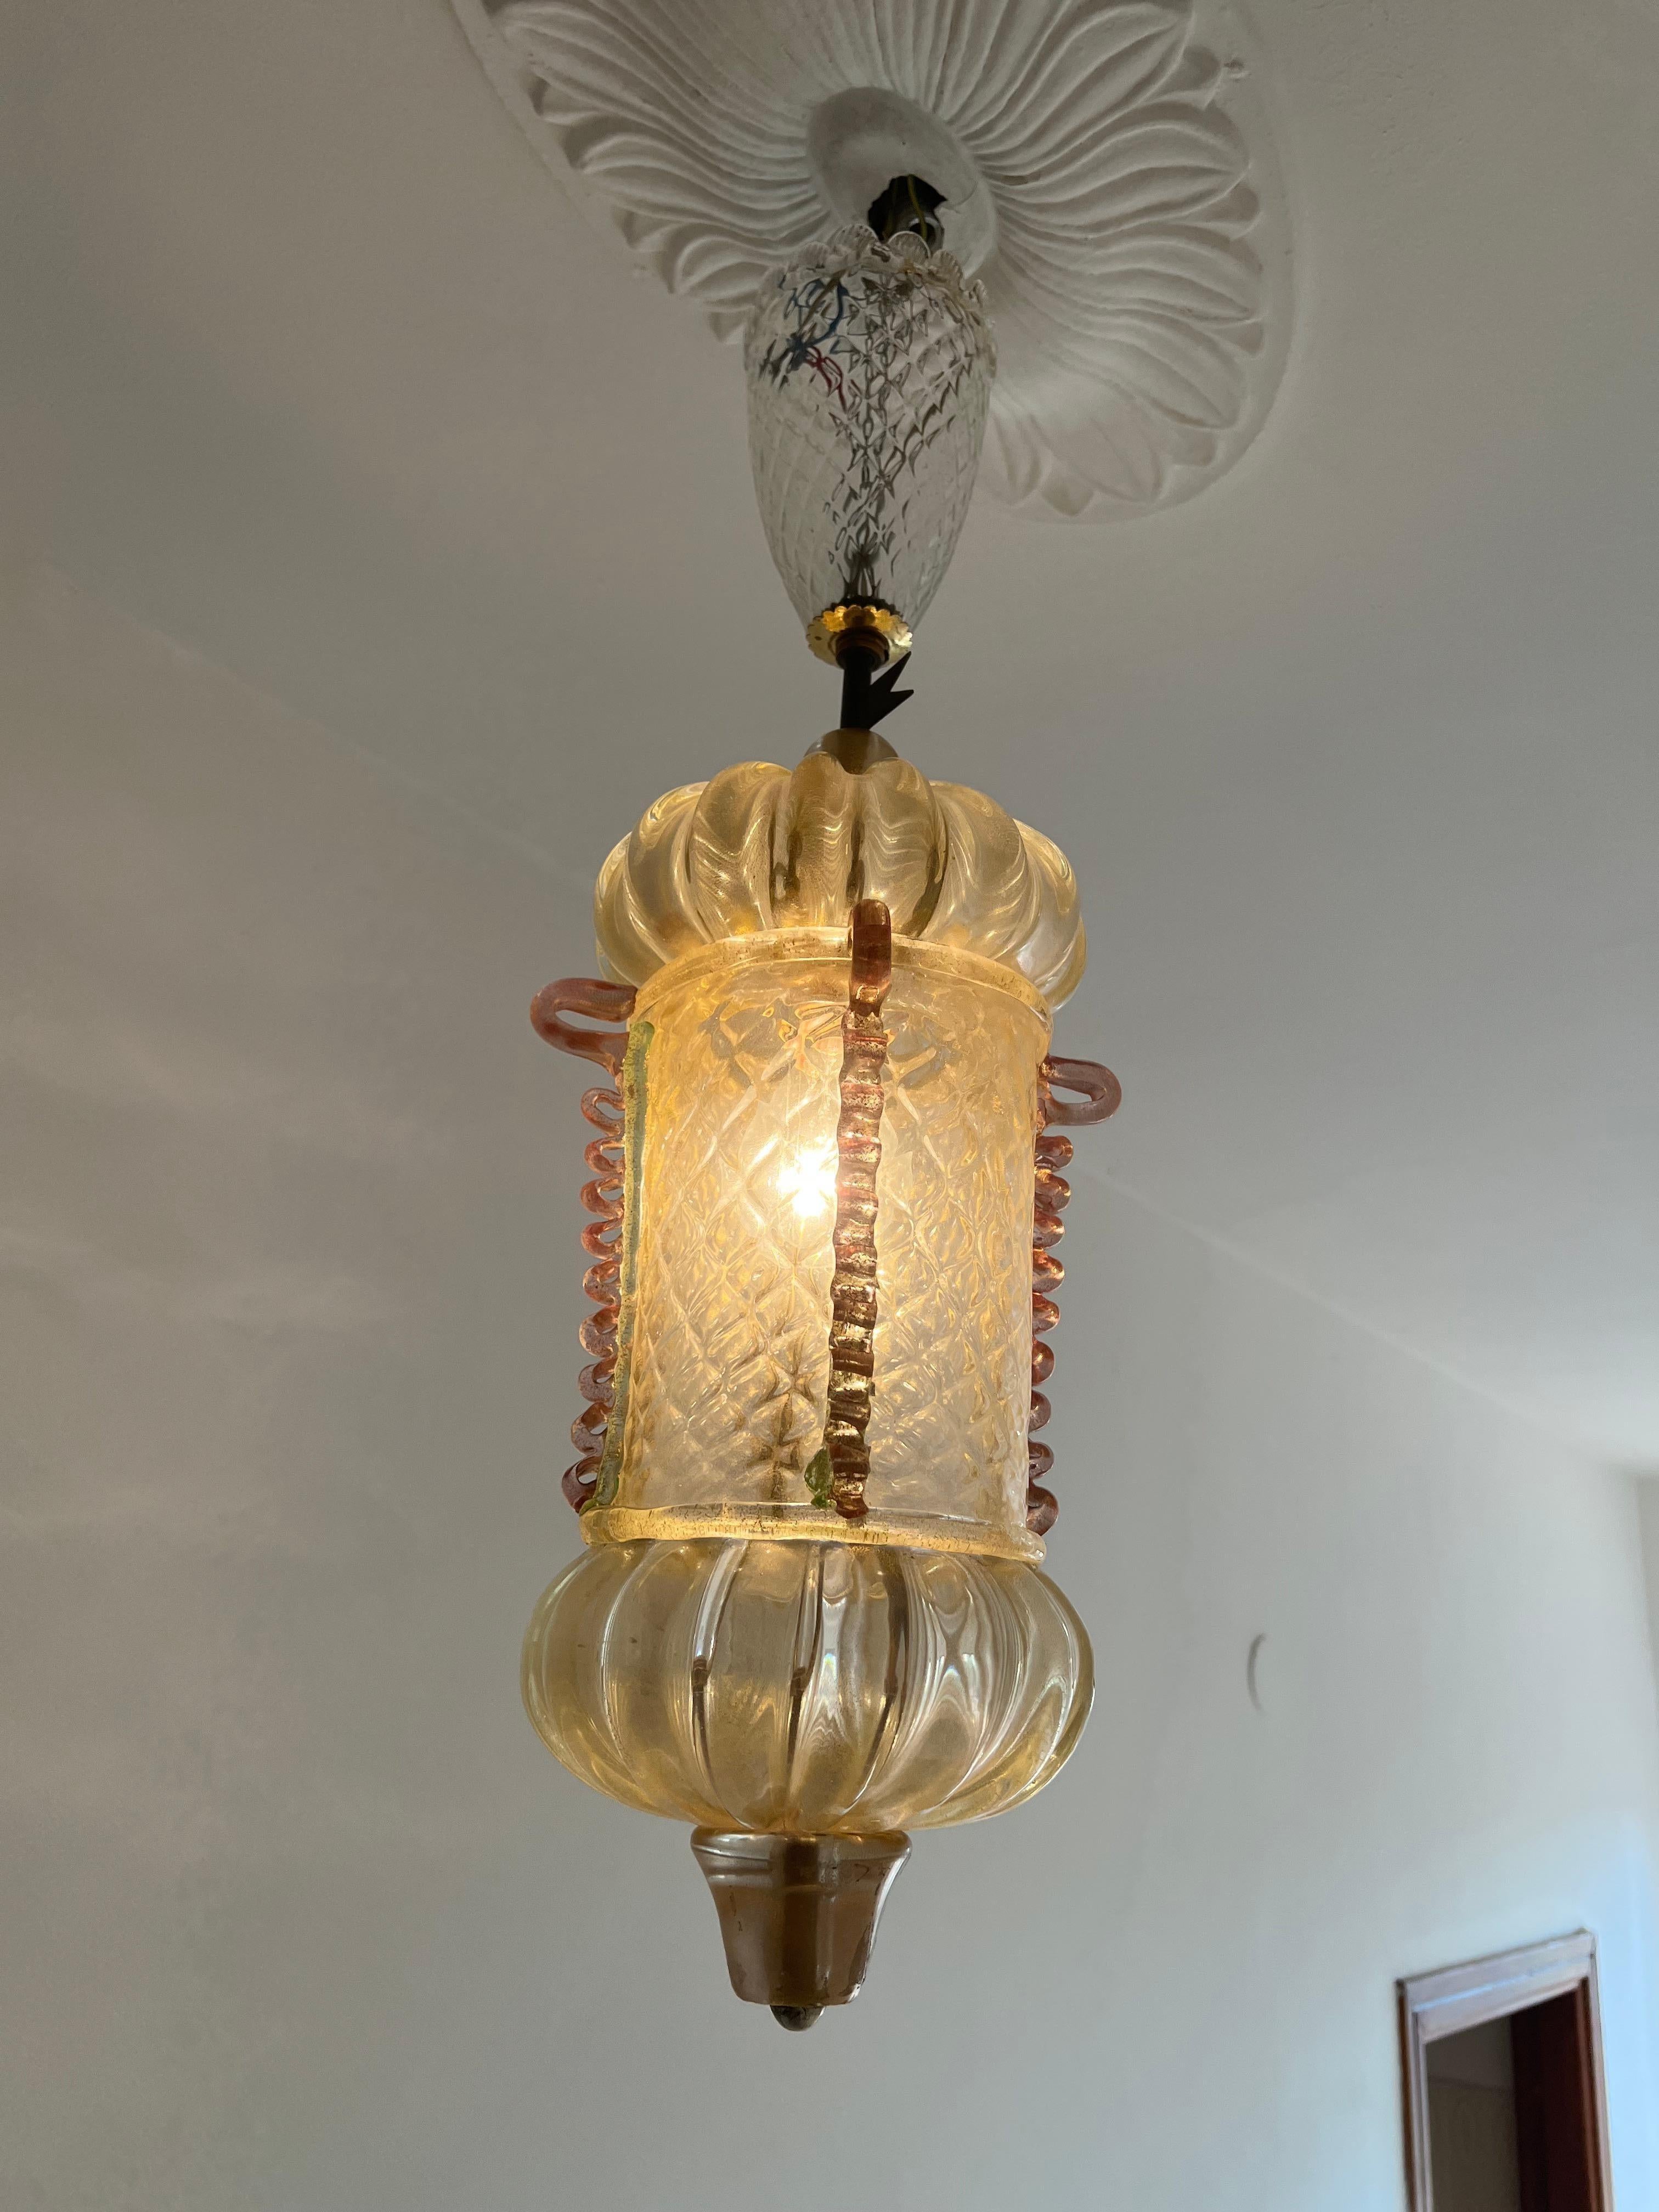 Wonderful and rare lantern chandelier by Barovier&Toso, 1950s. Piece of exquisite quality.
From Private collection by Giancarlo Planta.